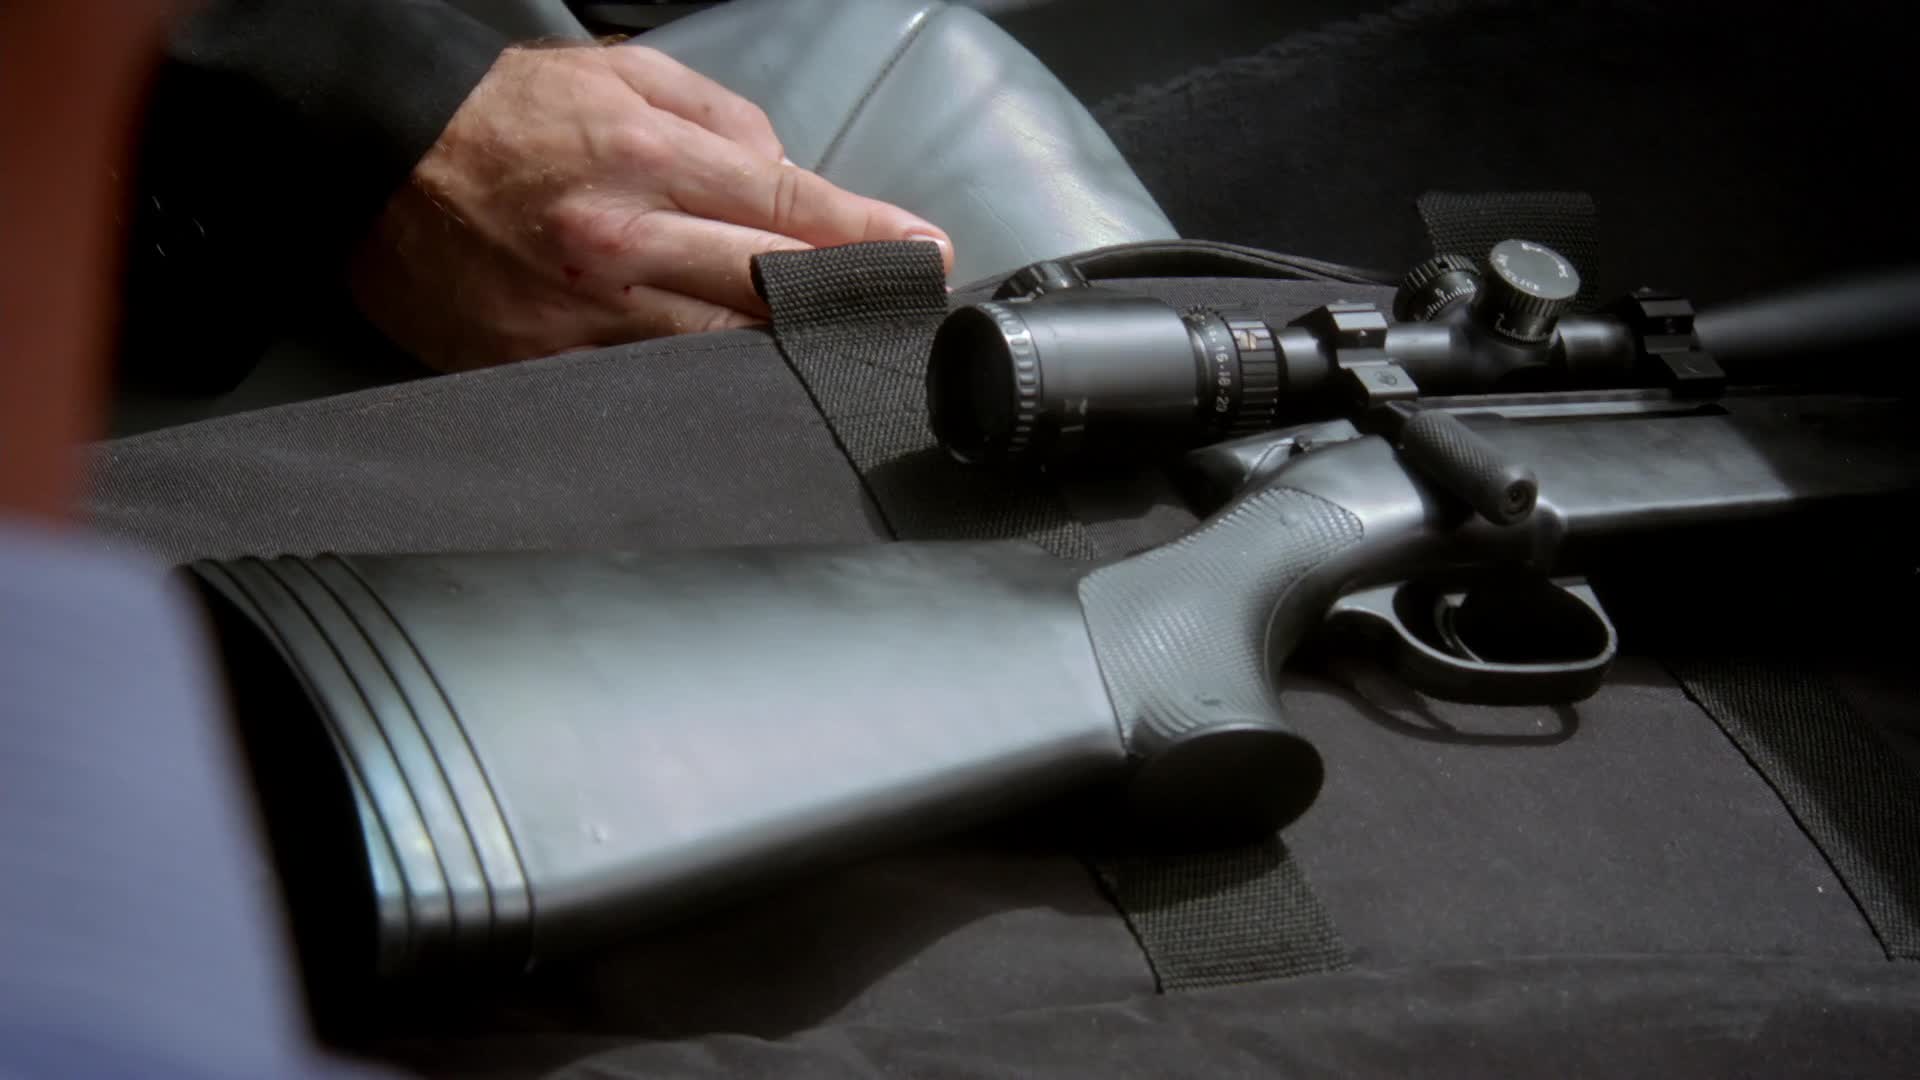 The Steyr SSG PIV of a hired assassin in "Hana I WaIa" (S3E14). Note the mounted riflescope.